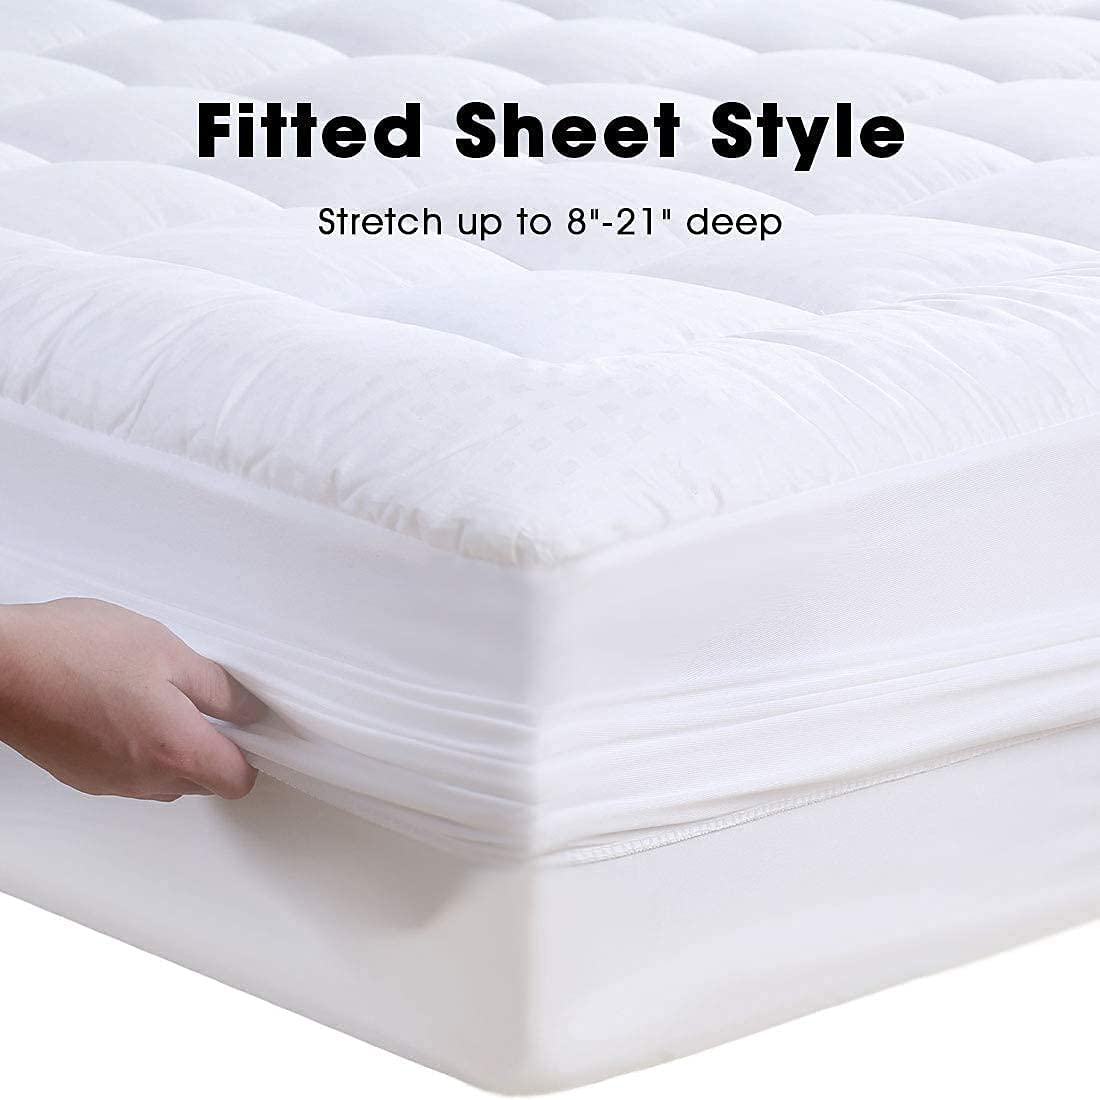 Balichun King Size Mattress Pad Pillow Top Mattress Cover Cotton Top 8-21" Fitted Deep Pocket Breathable Fluffy Soft Cooling Mattress Topper (78x80 Inches, White)